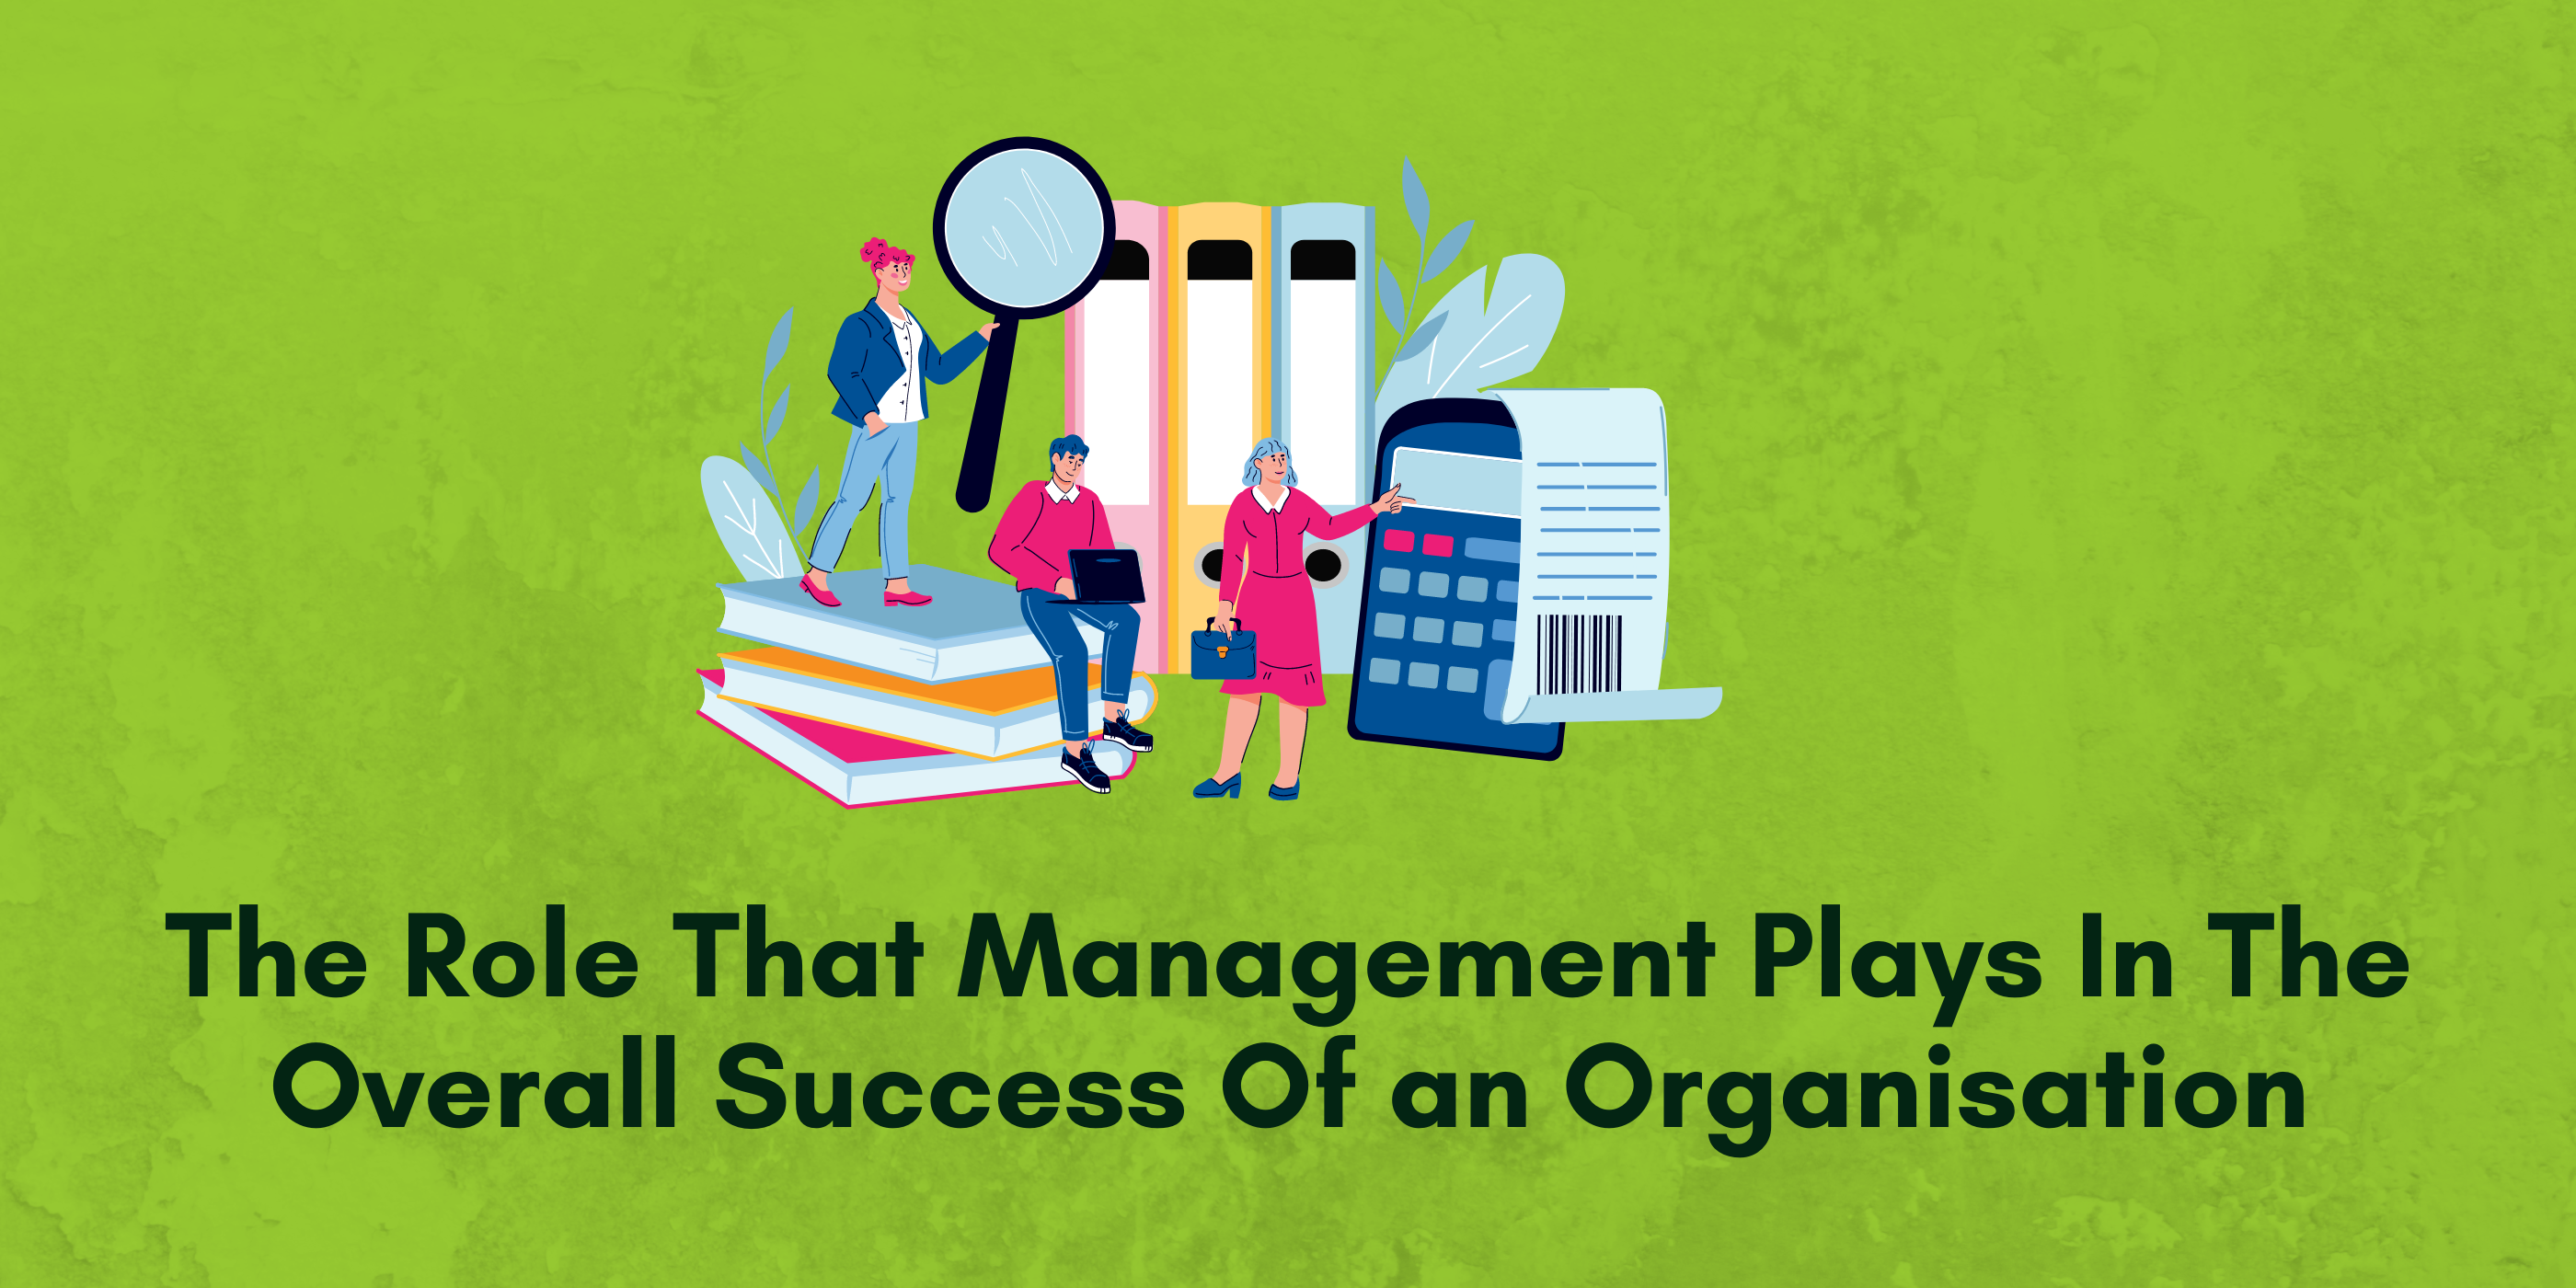 The Role Management Plays In The Success Of an Organisation